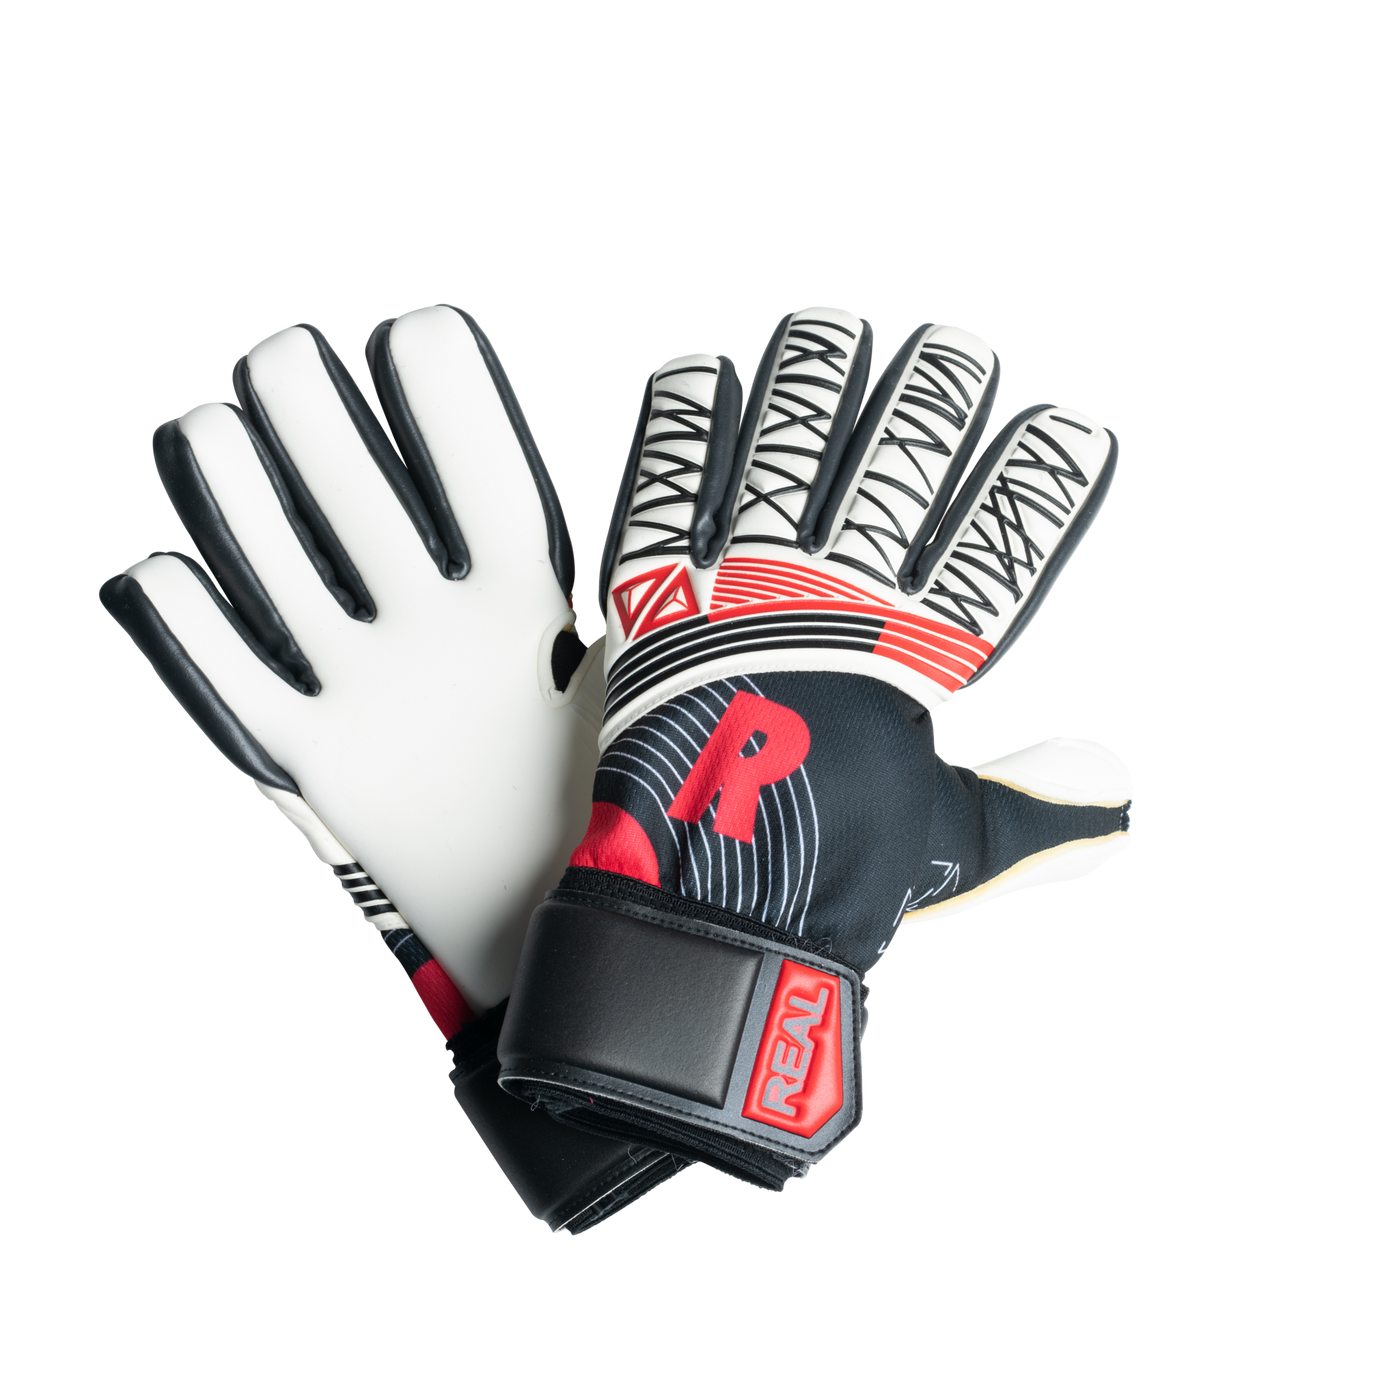 REAL JR 445 SPACE WHITE/BLACK/RED